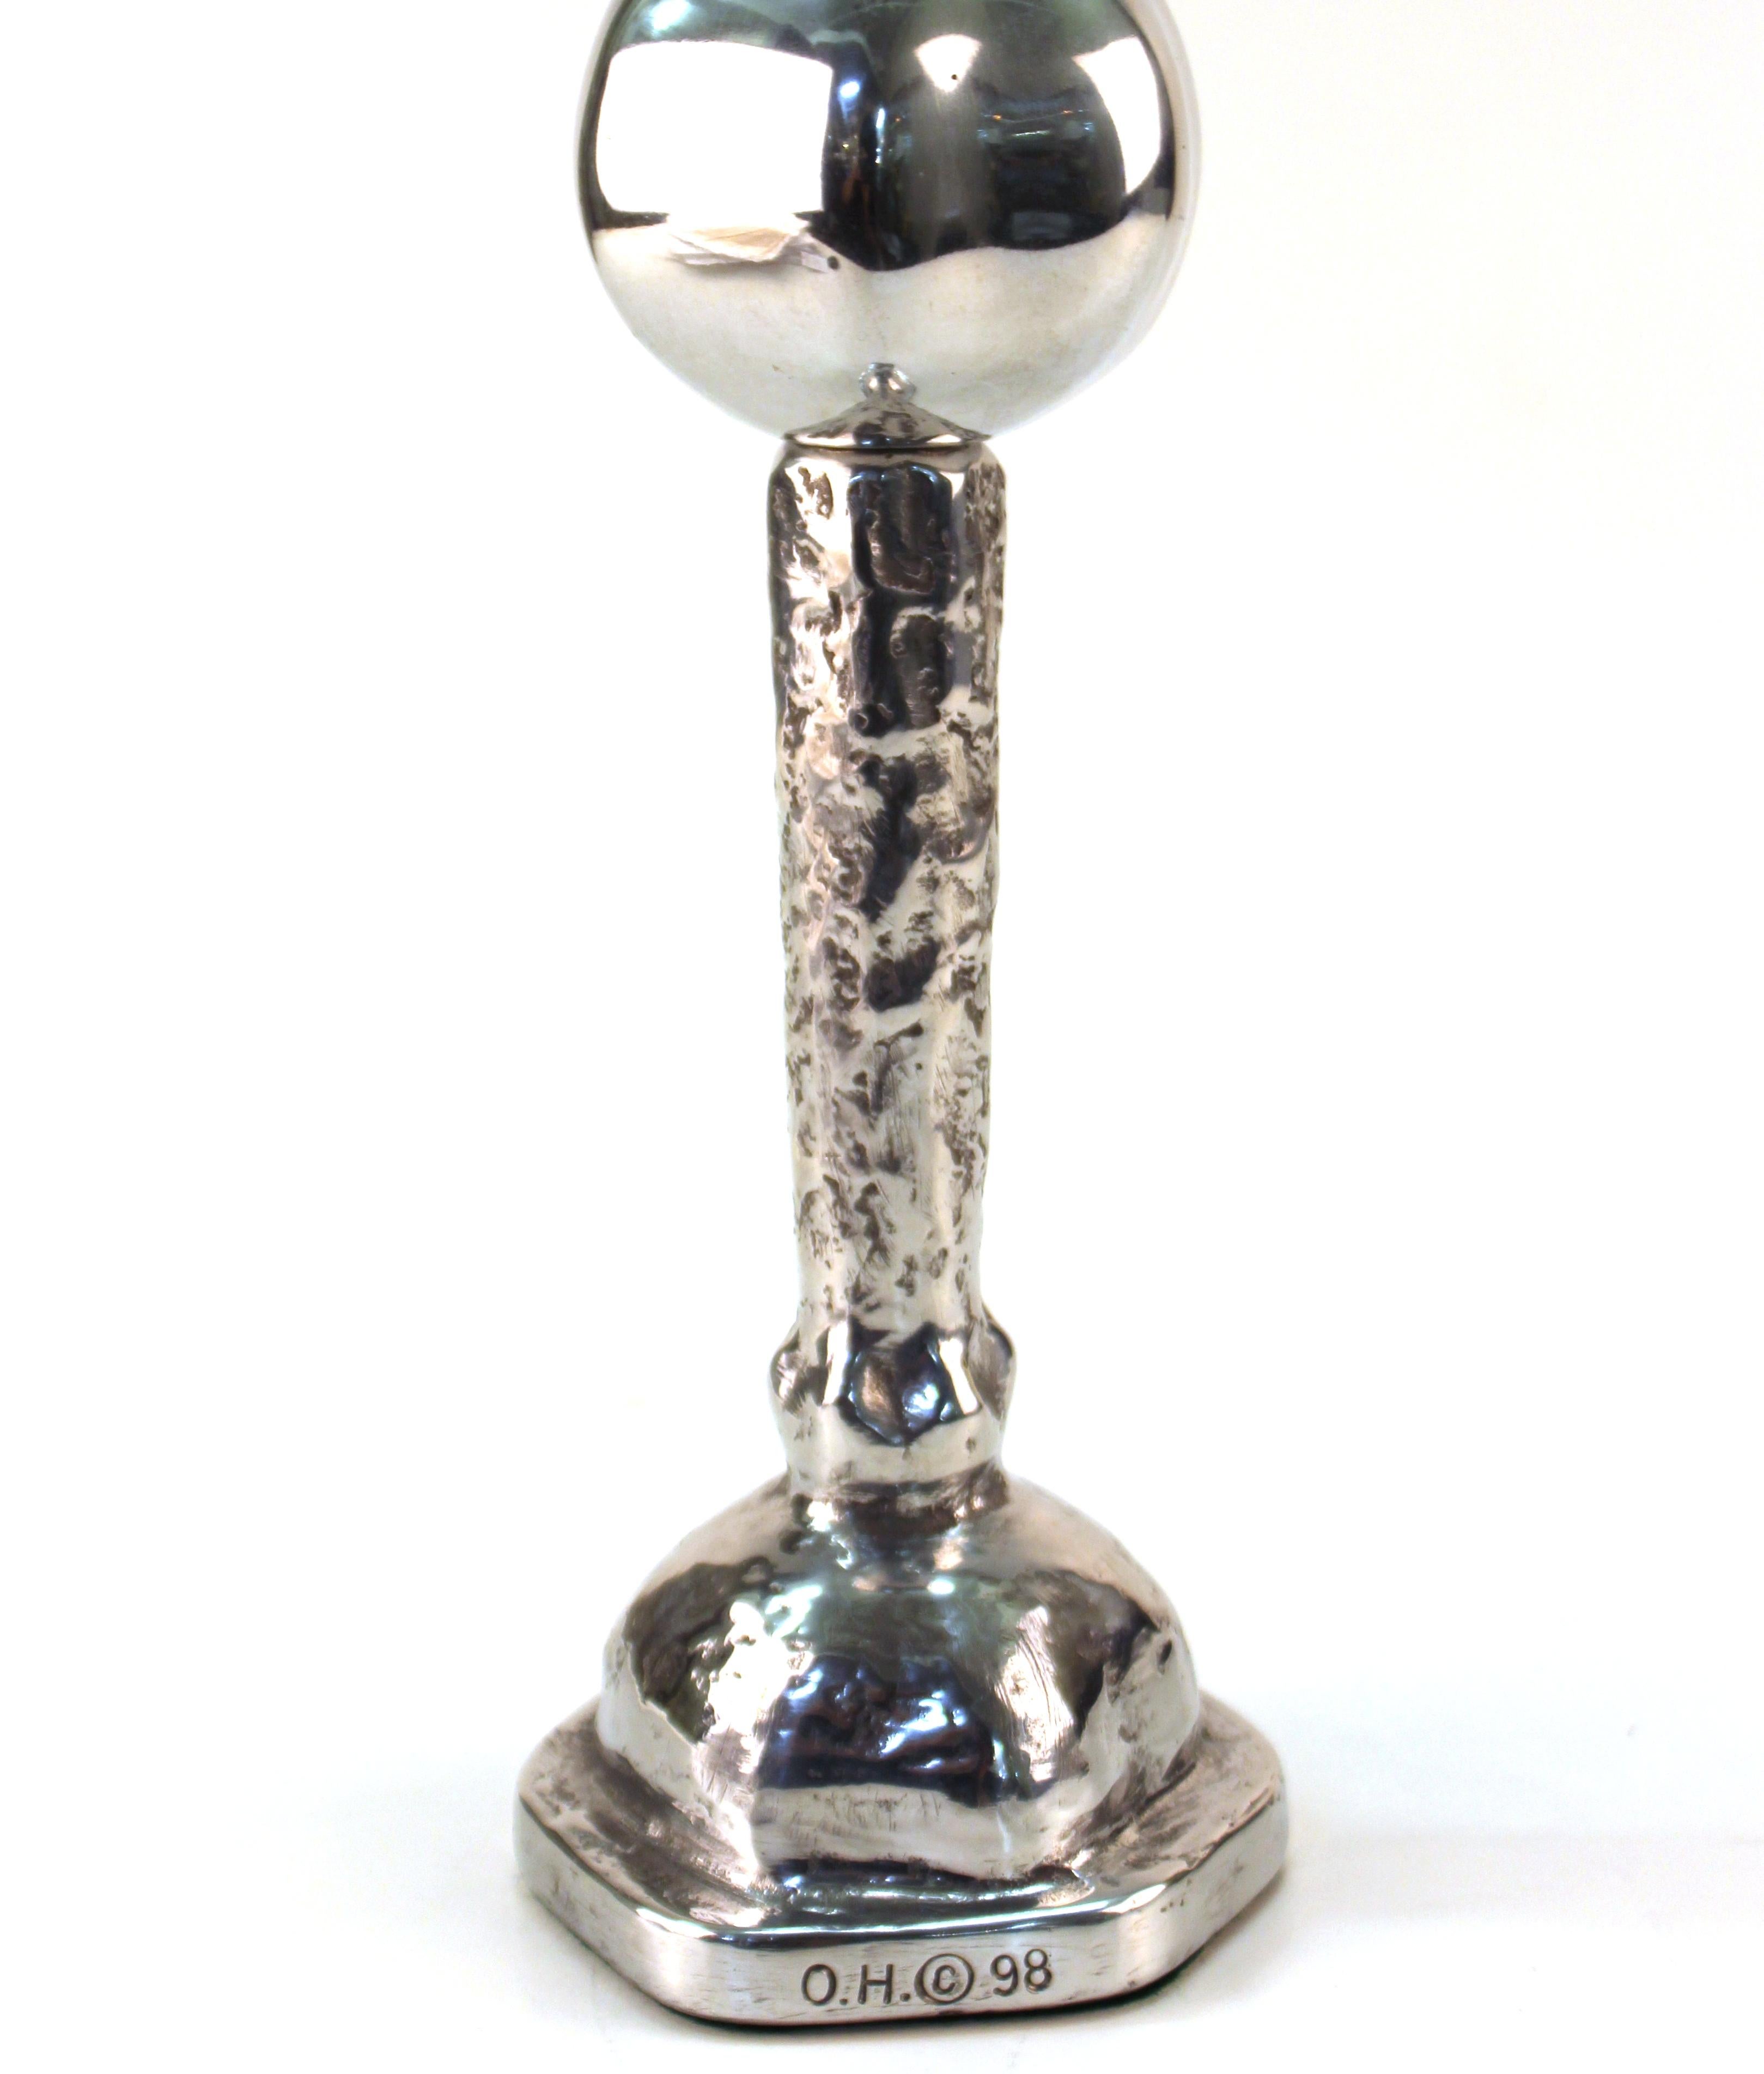 Oded Halahmy candlestick titled 'One Or Two' crafted in cast aluminum. The piece was produced in 1998. The piece remains in excellent vintage condition.